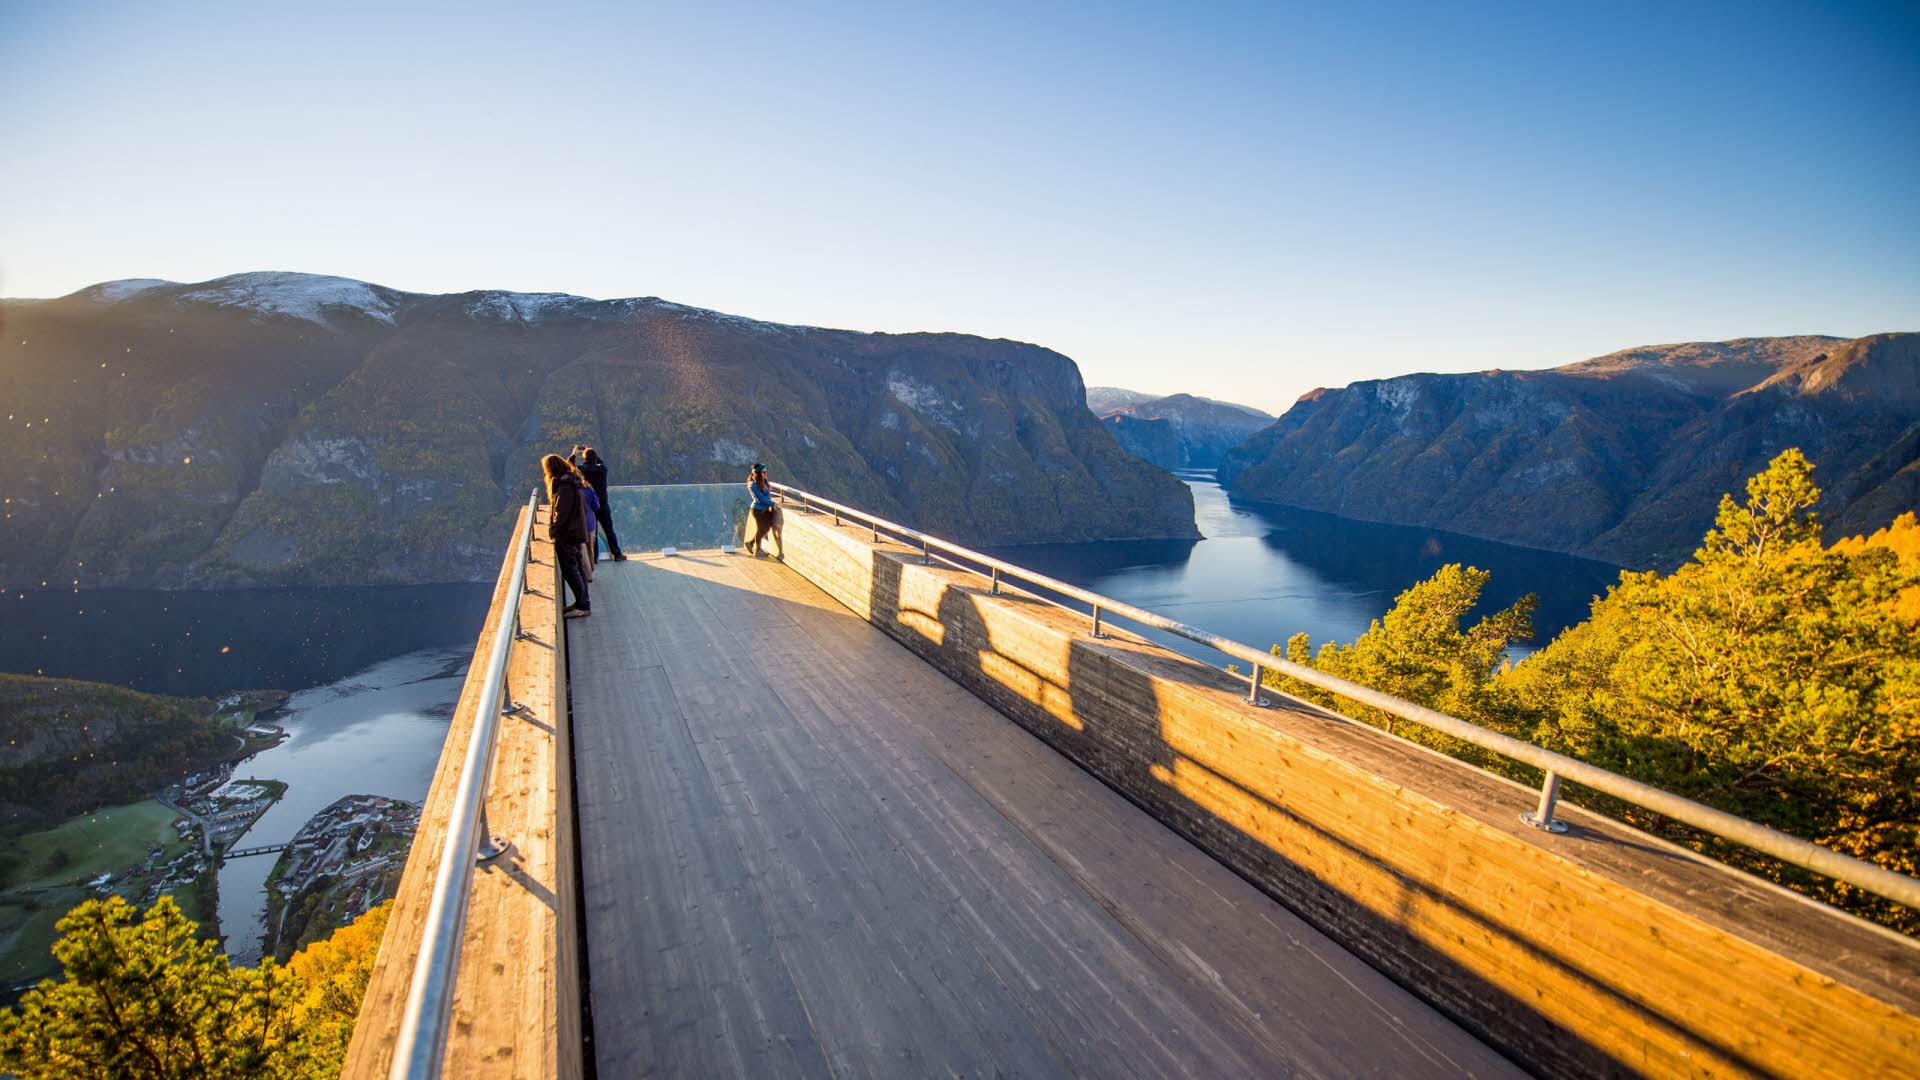 People at the Stegastein Viewpoint above Aurland and the fjord at sunset